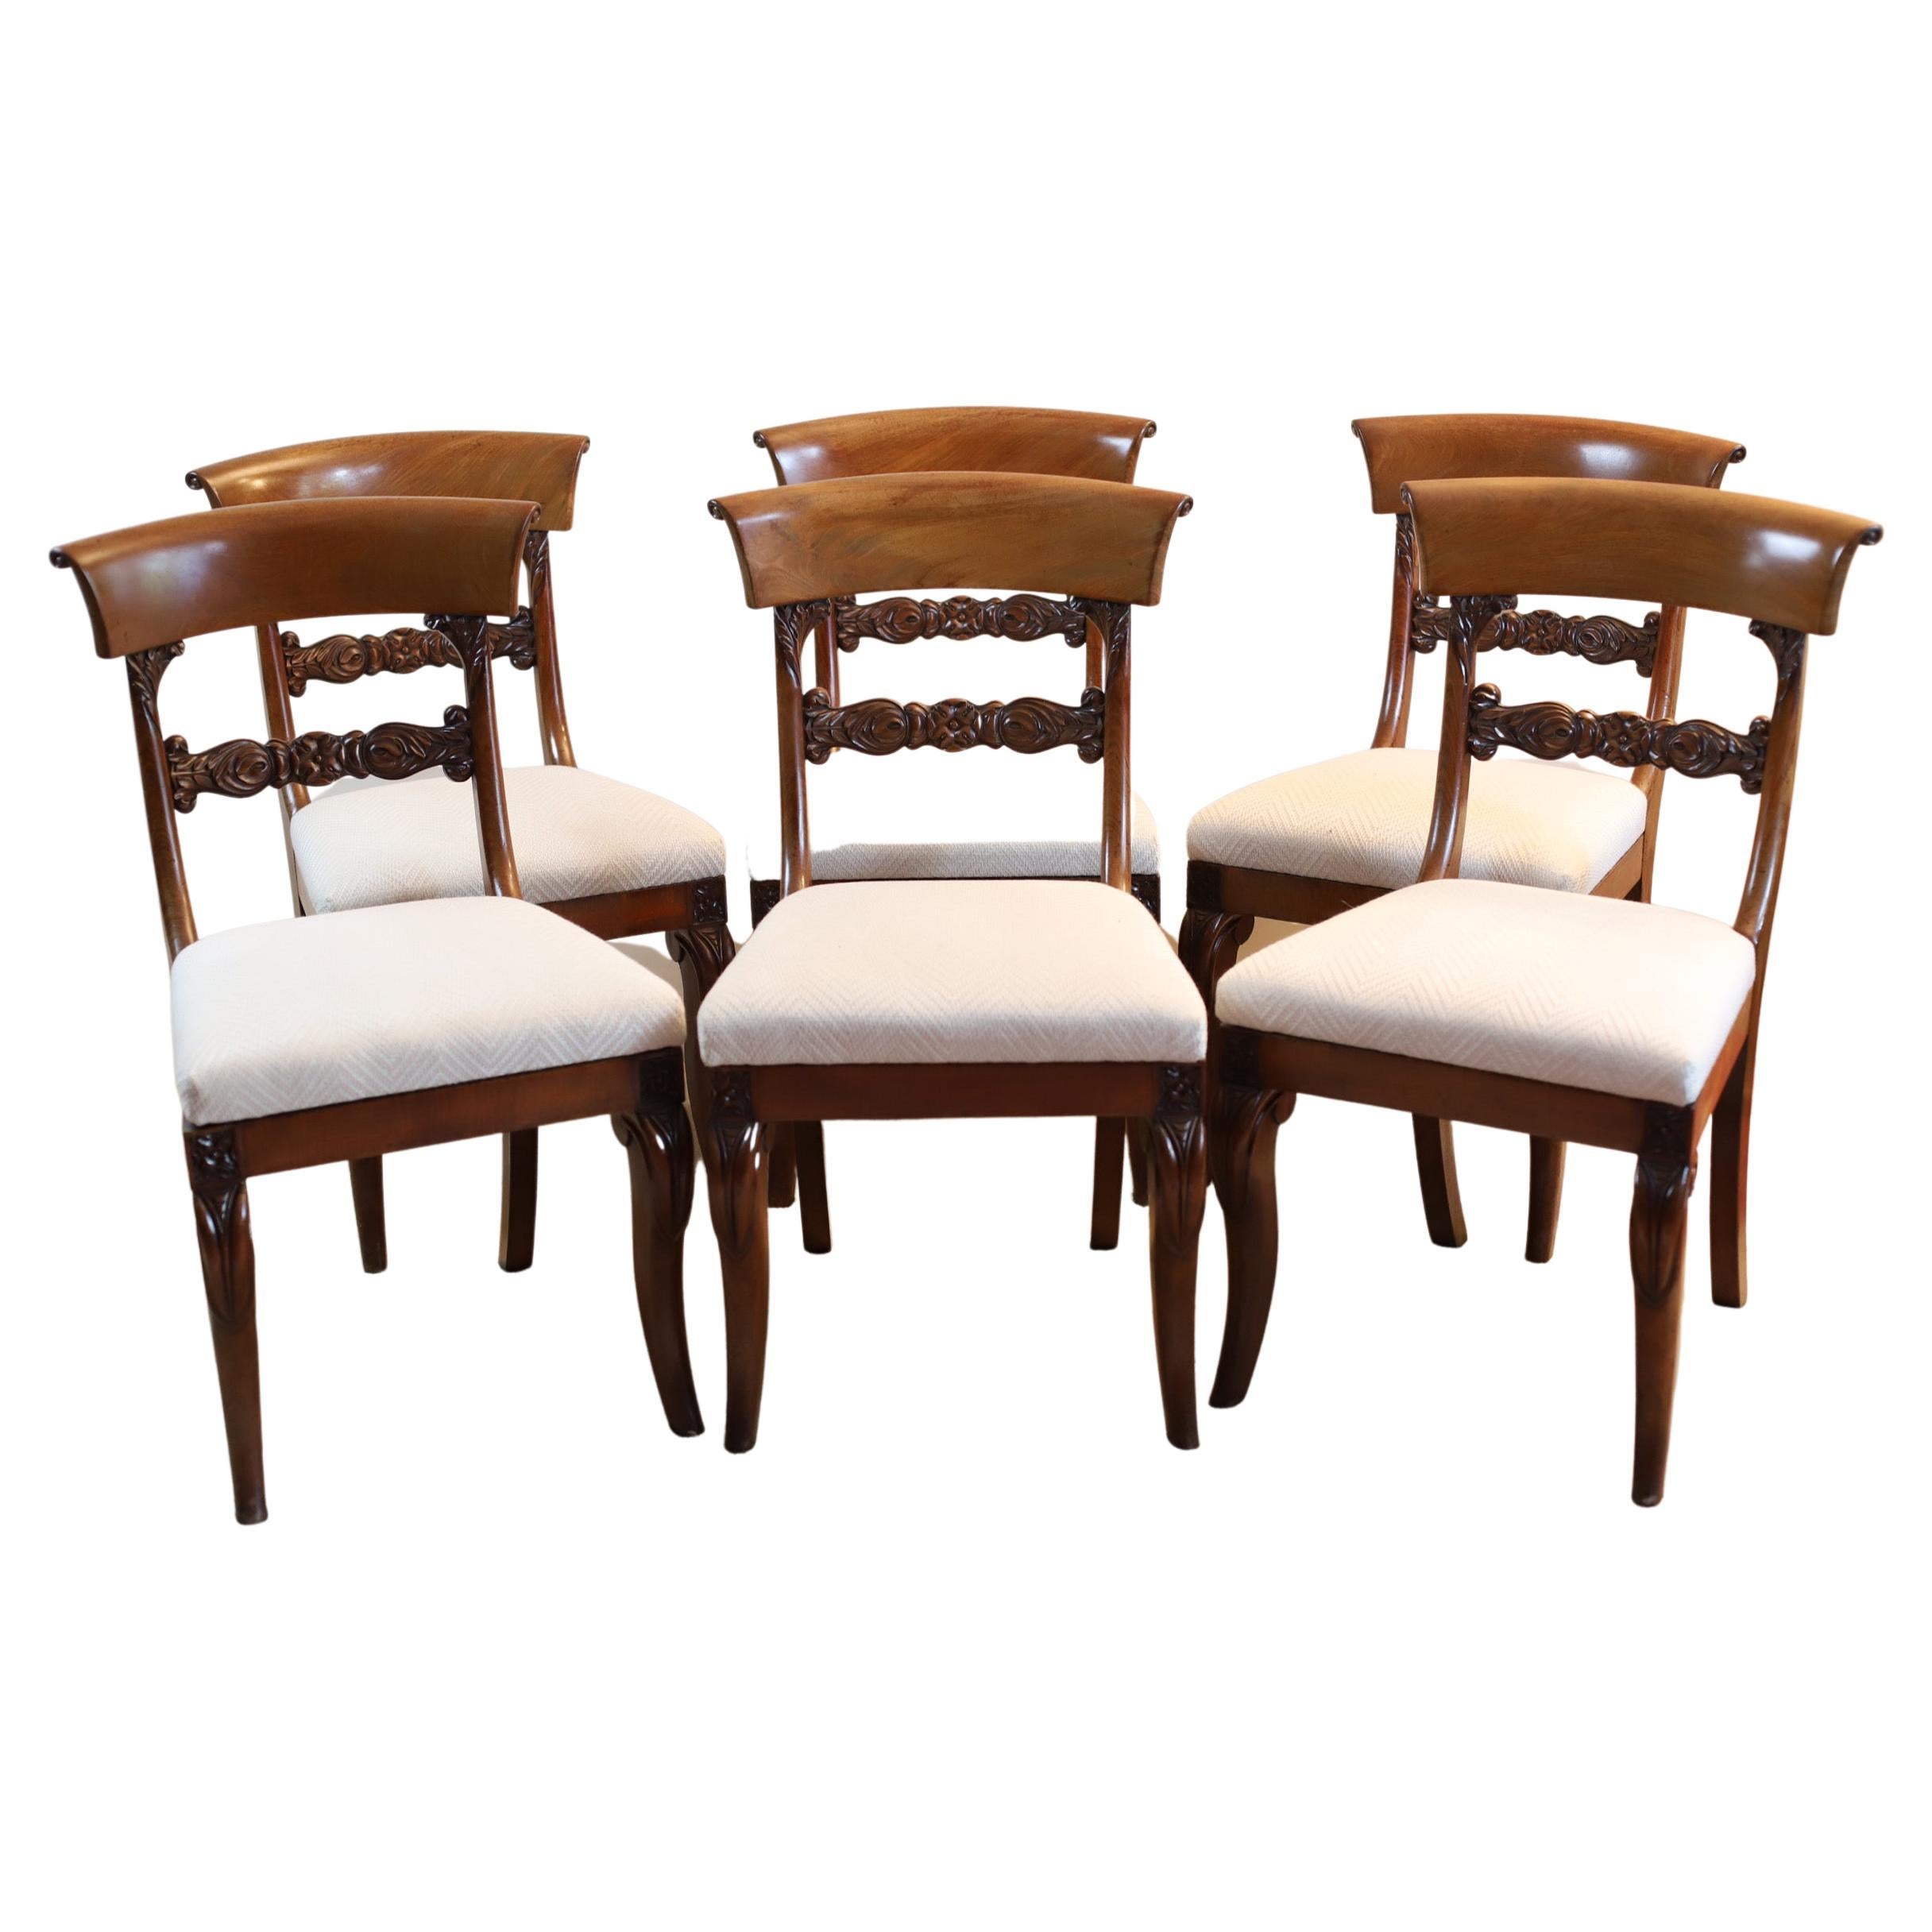 Beautiful Set of 6 William IV Dining Chairs